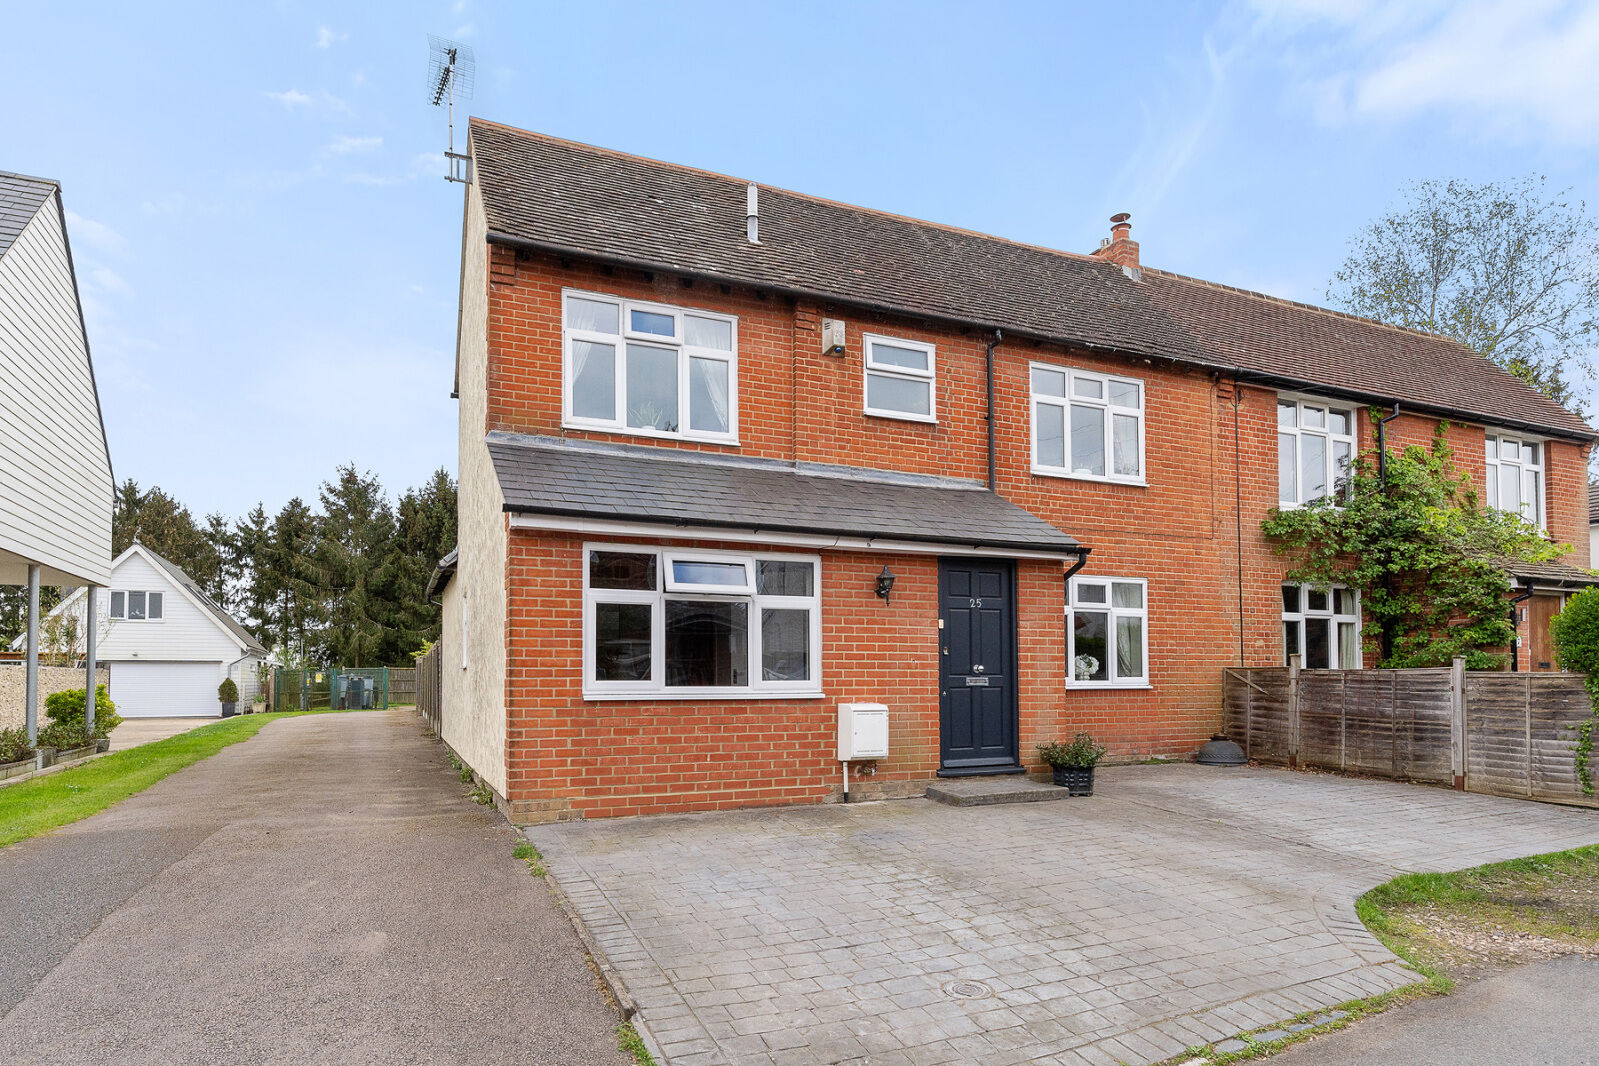 4 bedroom semi detached house for sale Bentfield Causeway, Stansted, CM24, main image